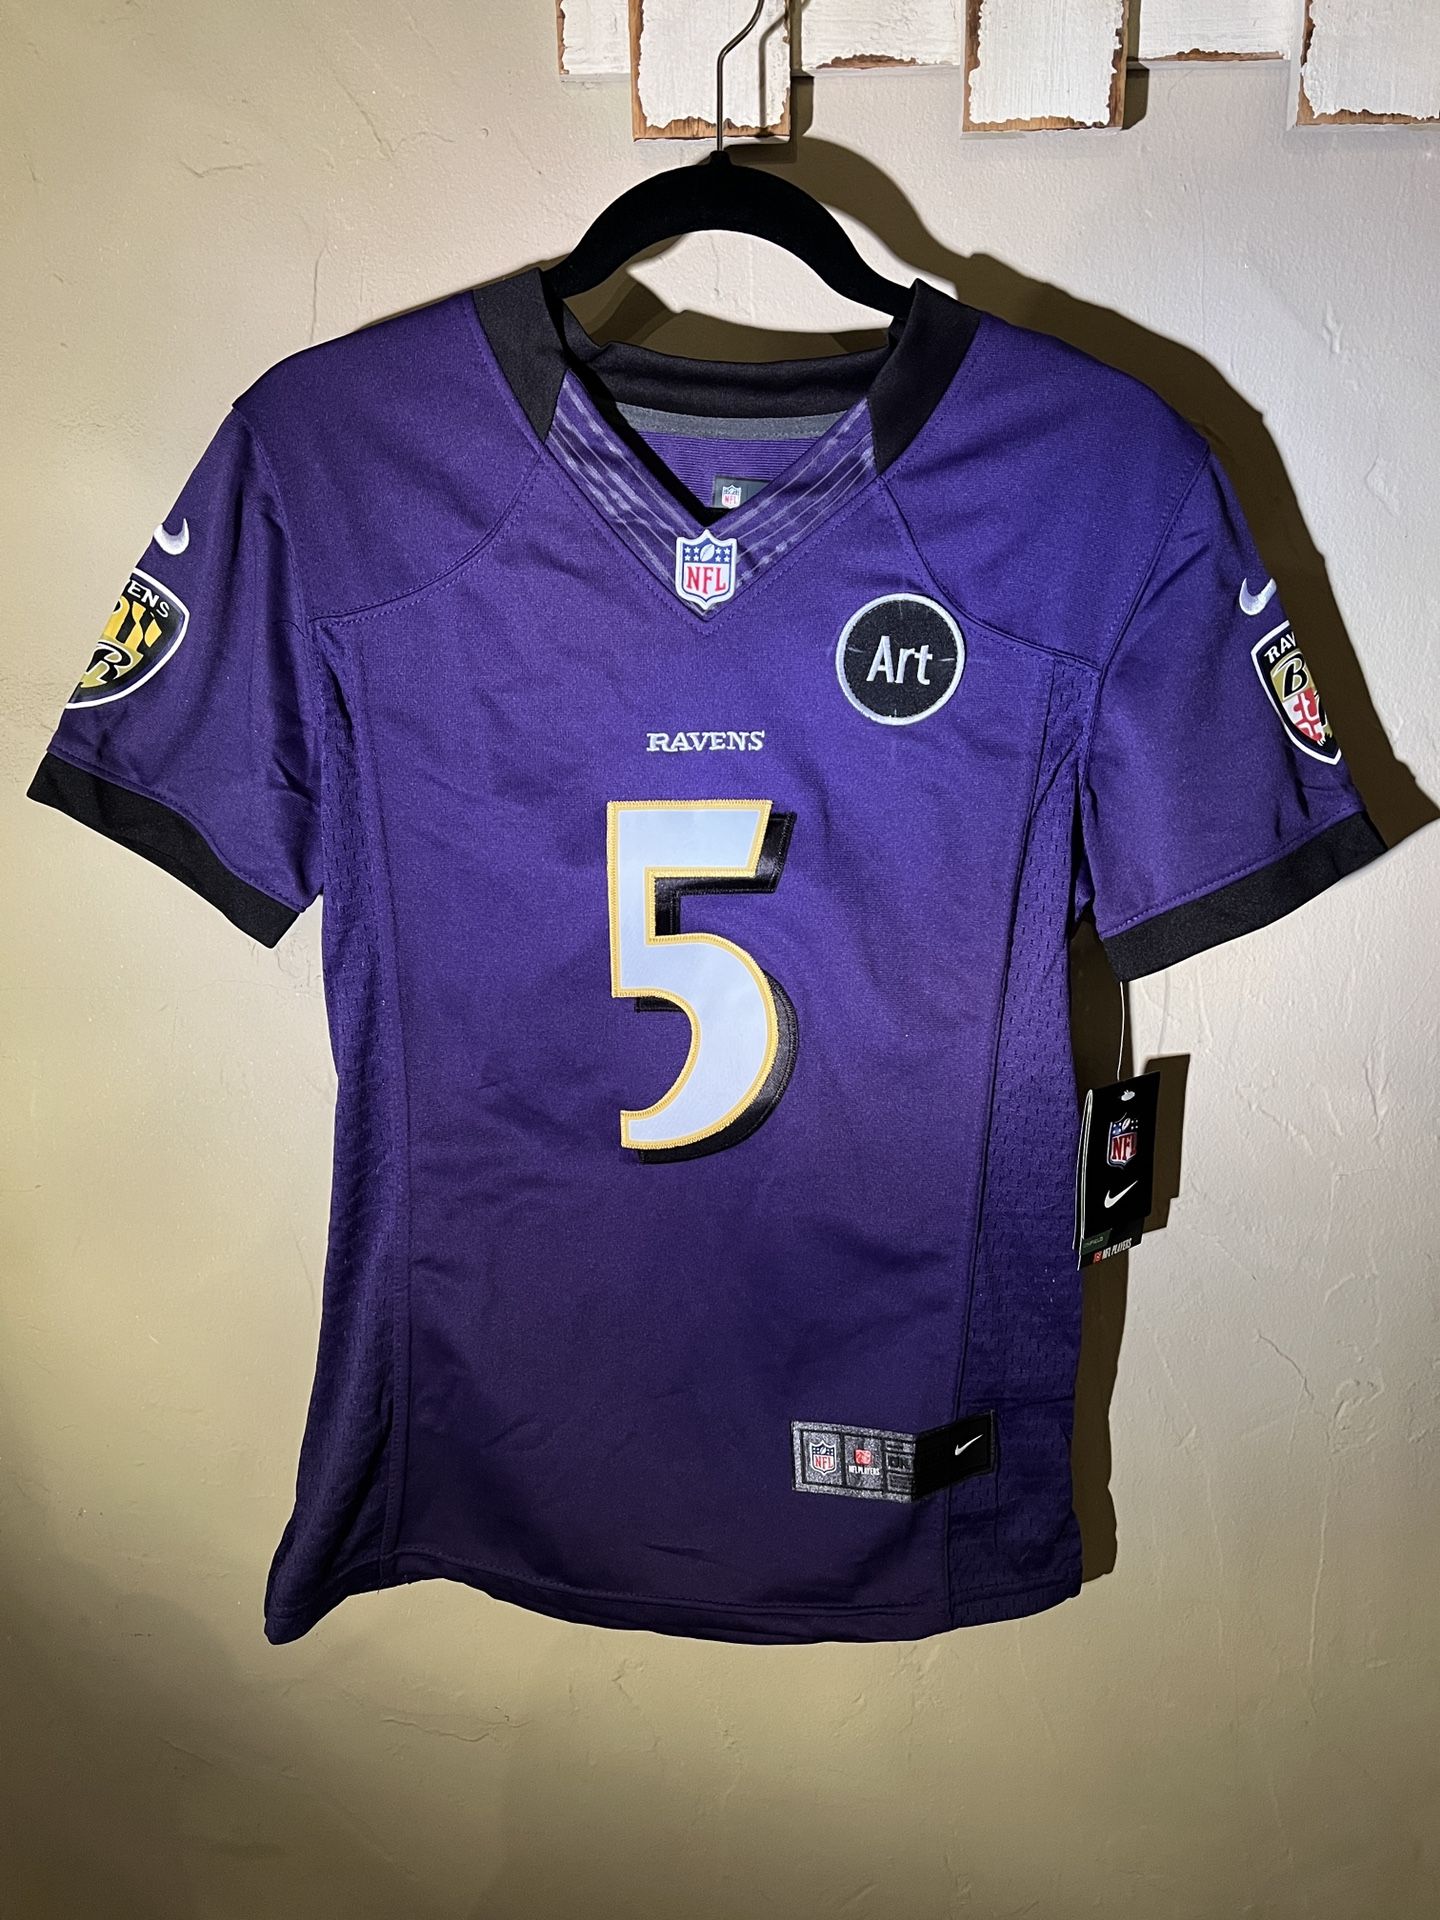 Nike NFL On-field Flacco #5 Baltimore Ravens Womens Medium Athletic Jersey Art Patch New